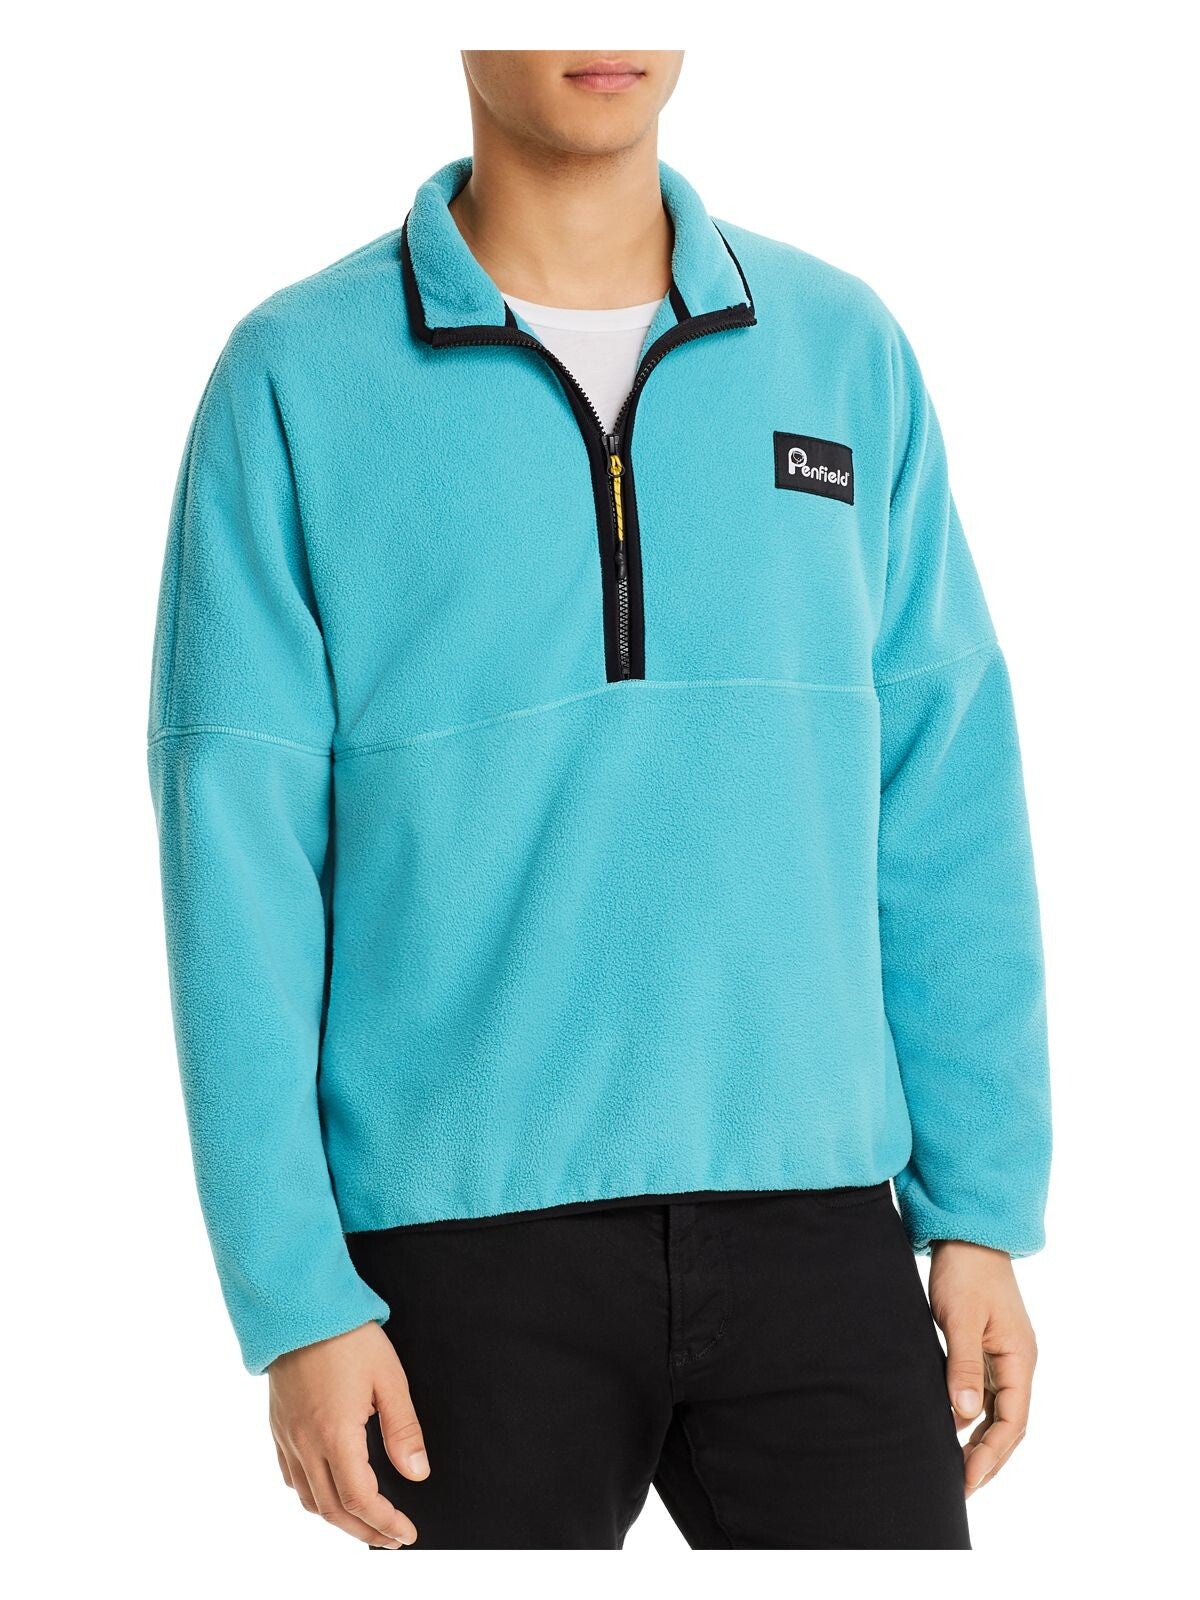 PENFIELD Mens Turquoise Classic Fit Quarter-Zip Fleece Pullover Sweater S